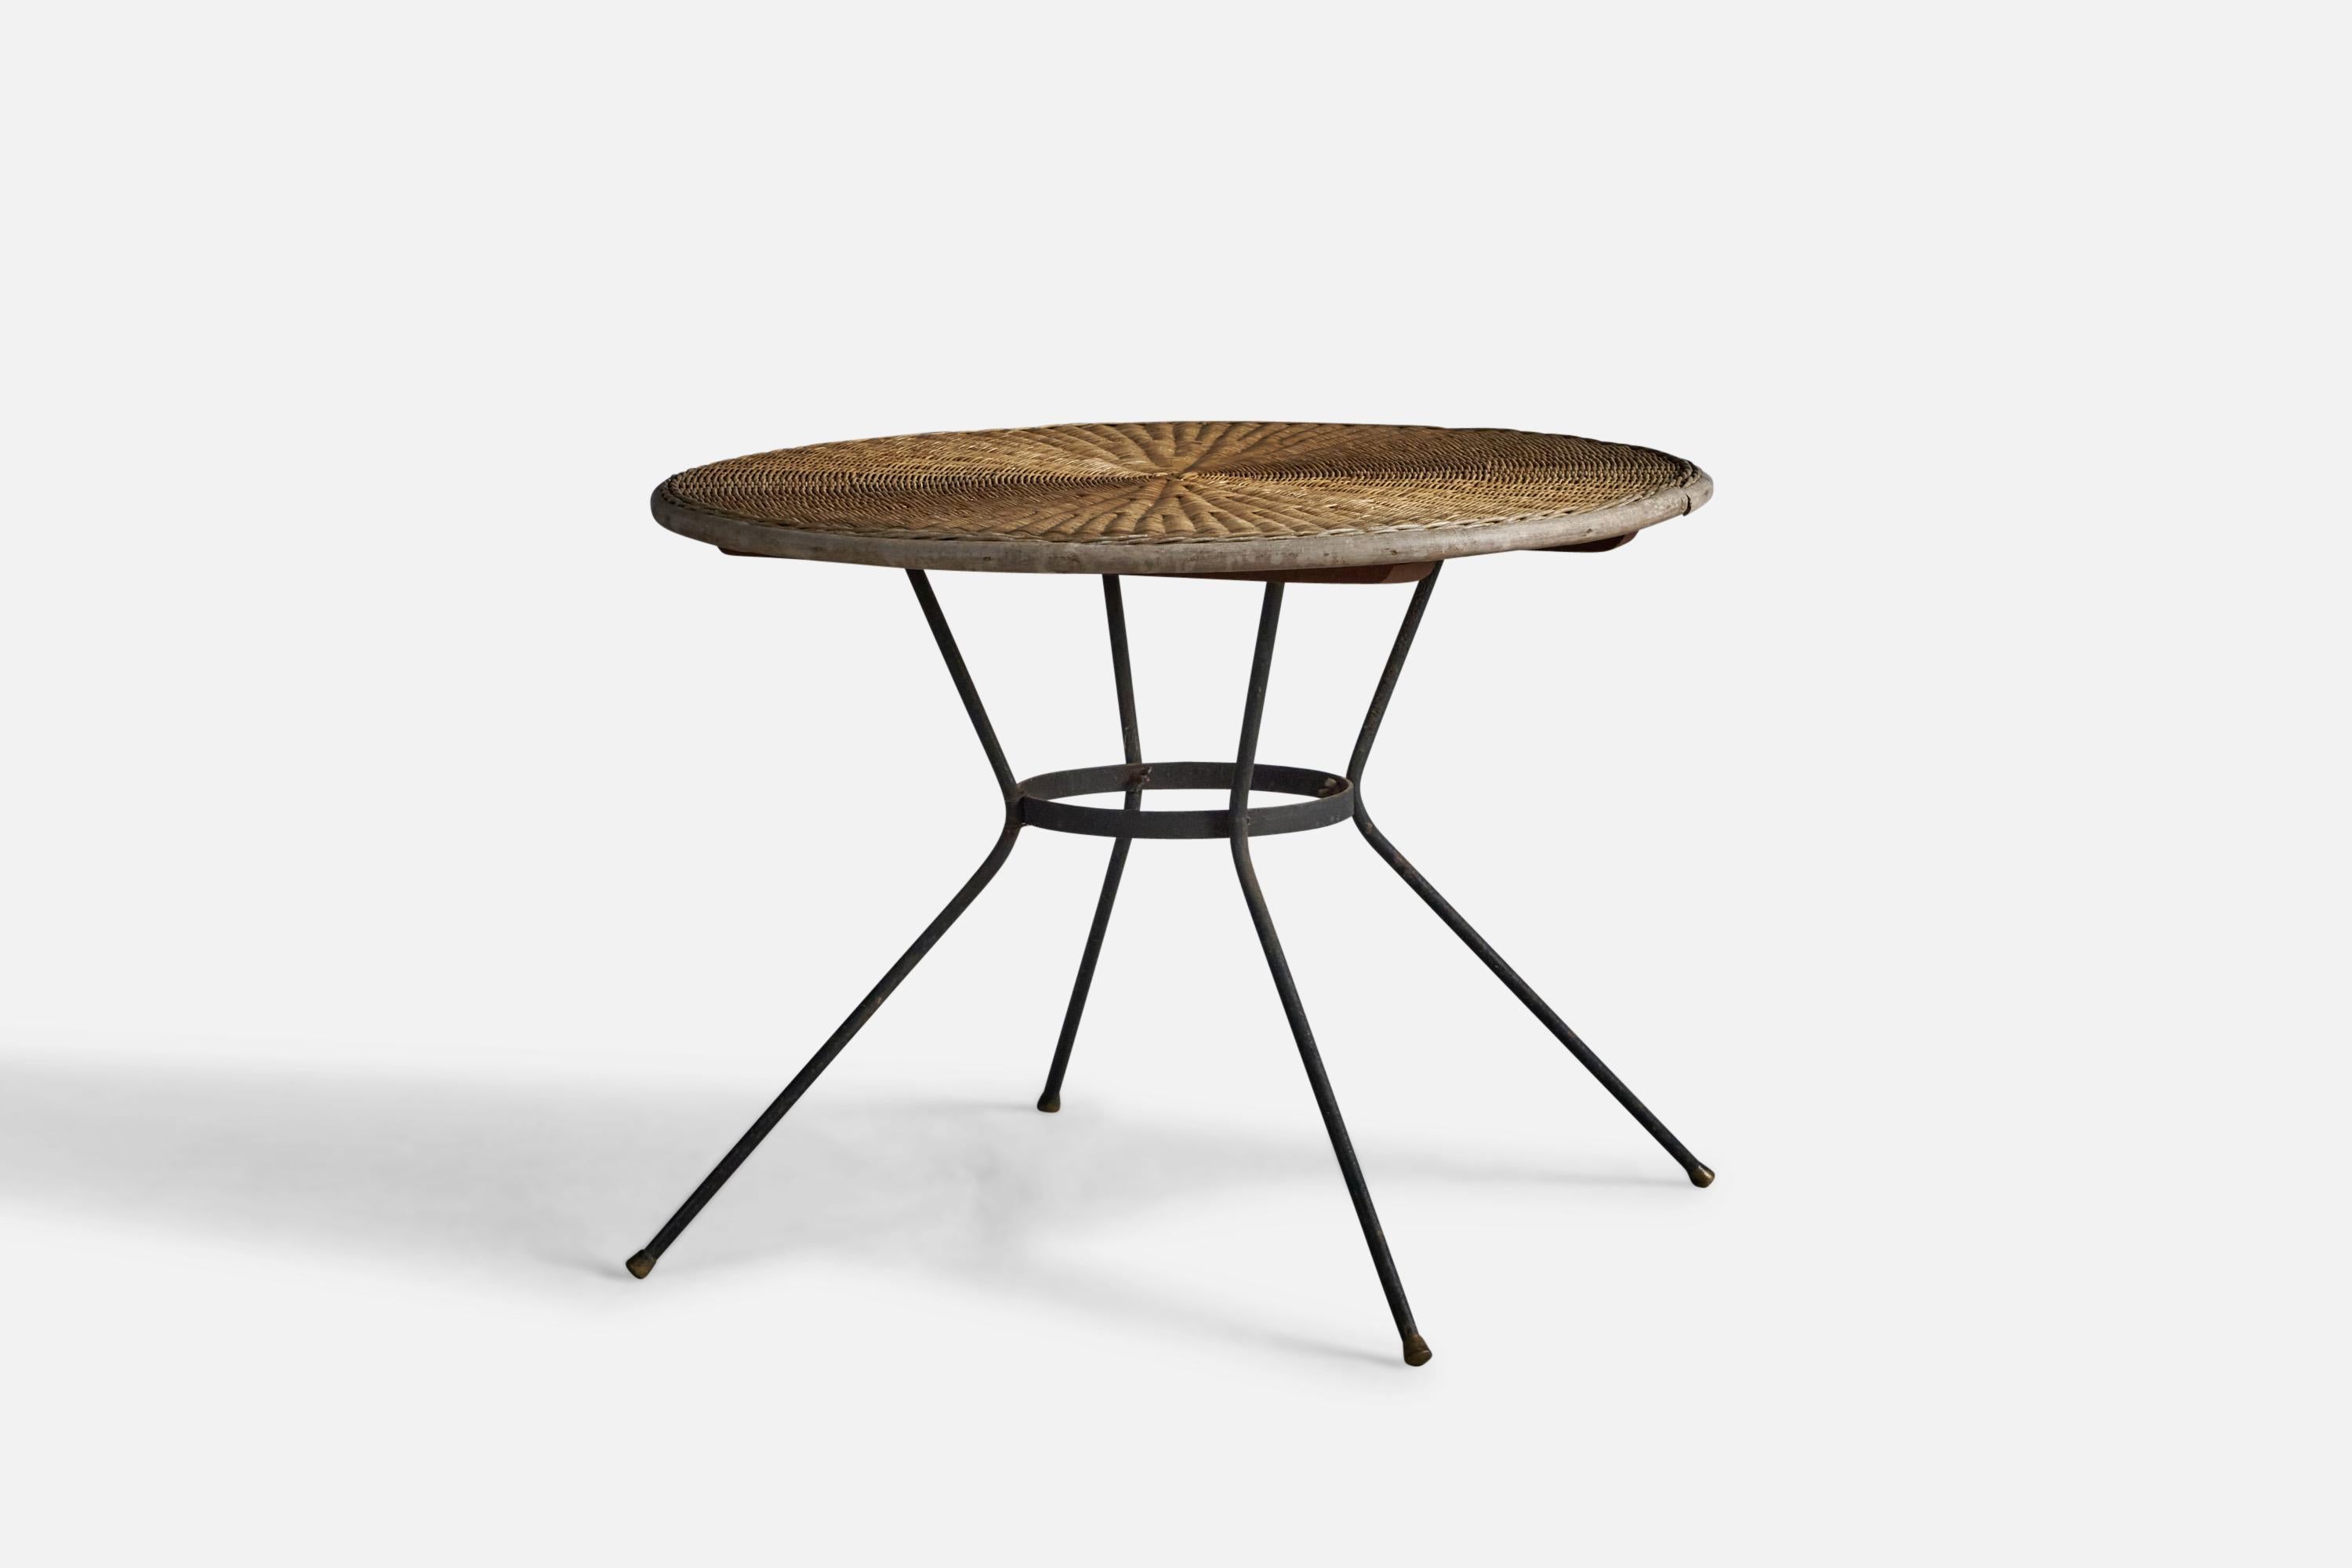 A small round rattan and lacquered metal table or dining table, designed and produced in the US, c. 1950s.